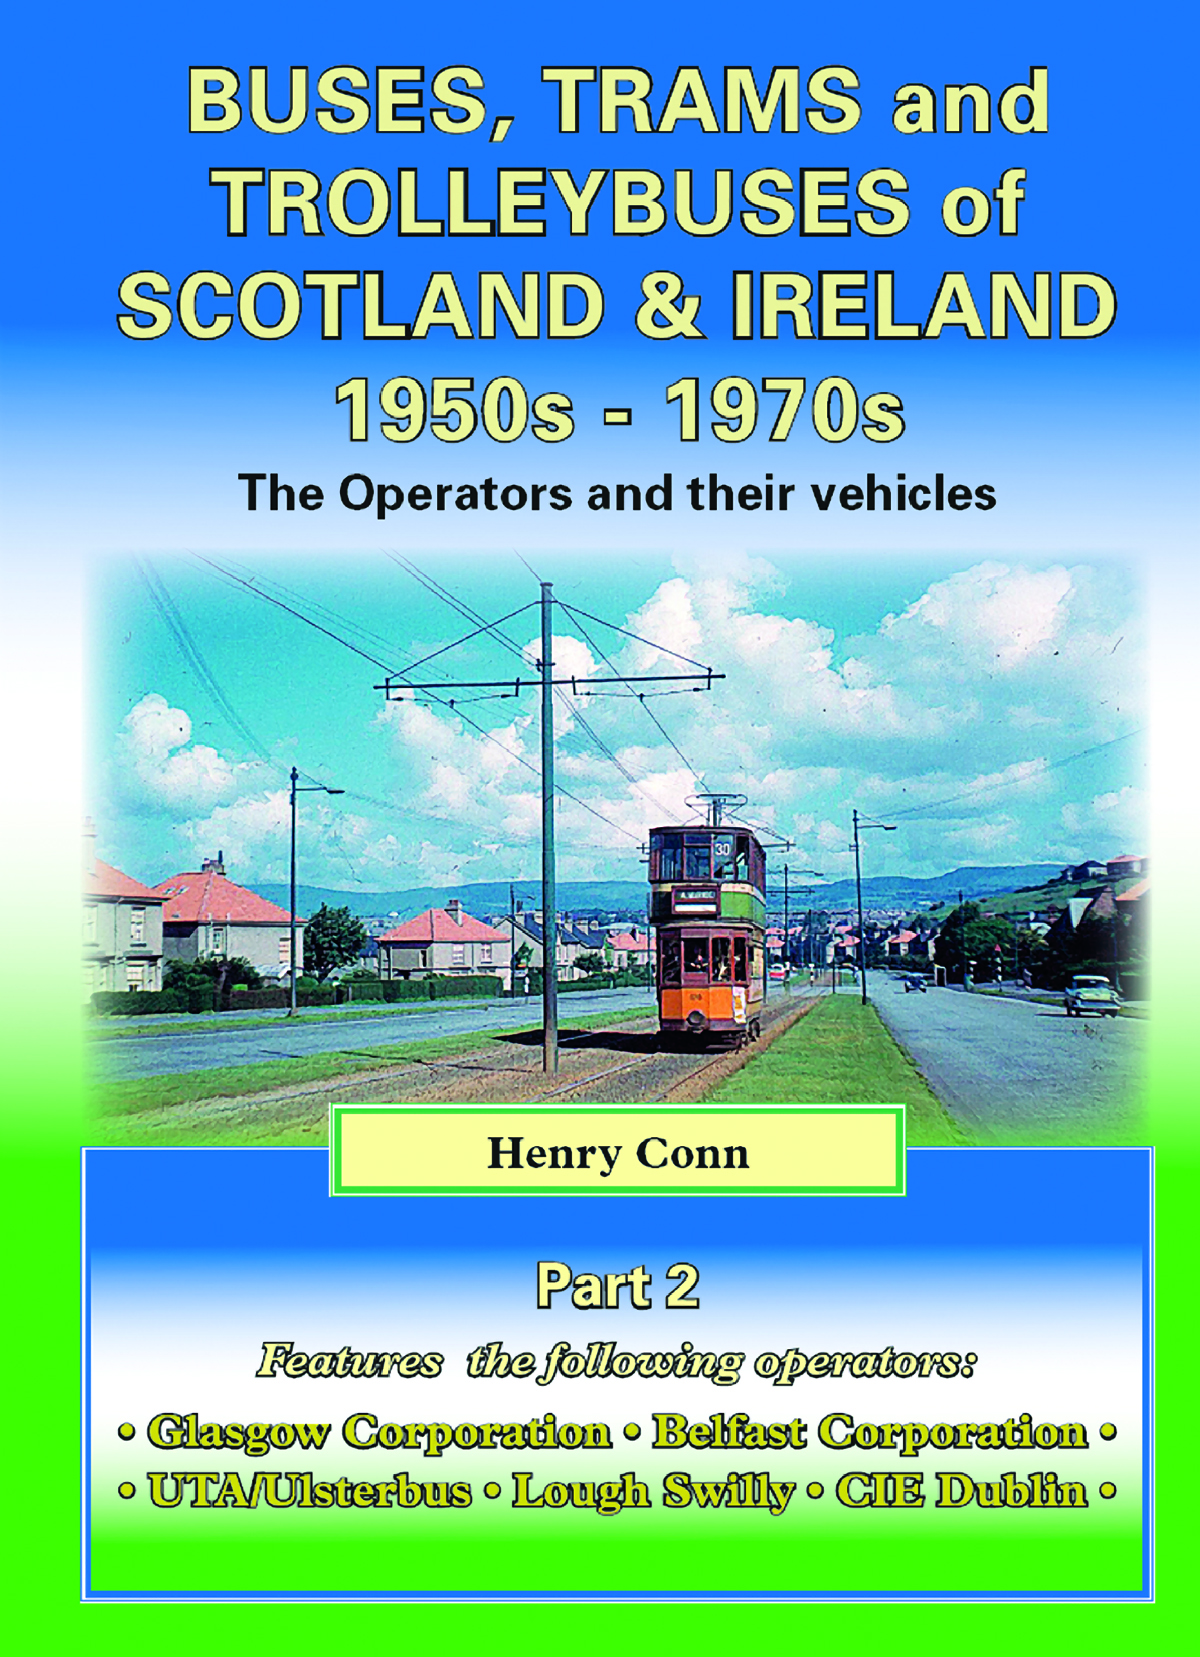 4013 - Buses & Trolleybuses of Scotland & Ireland Part 2: Non Cities